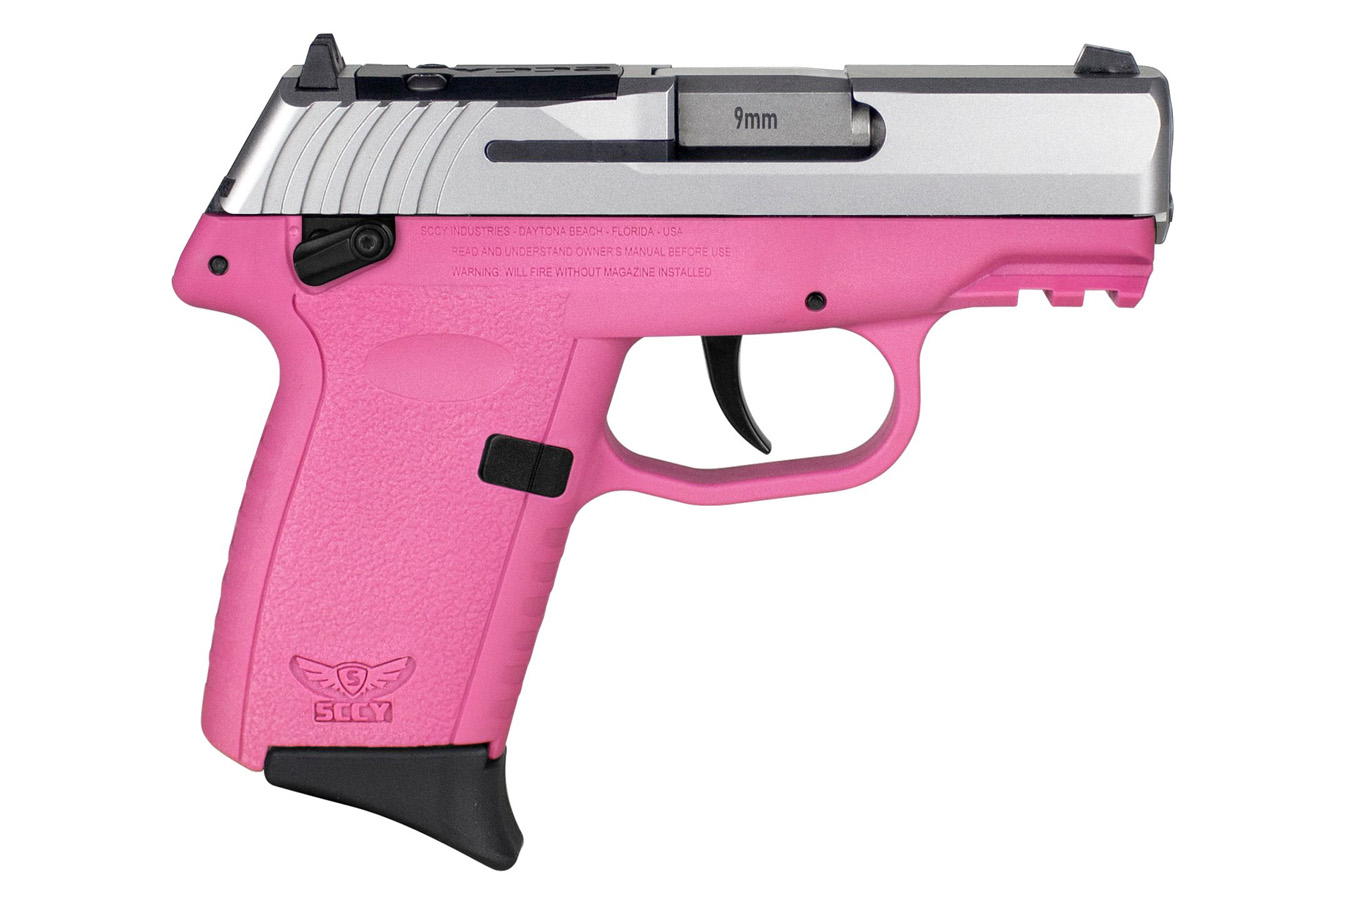 No. 7 Best Selling: SCCY CPX1 9MM TWO TONE PINK GRIP 3.1 I BBL 